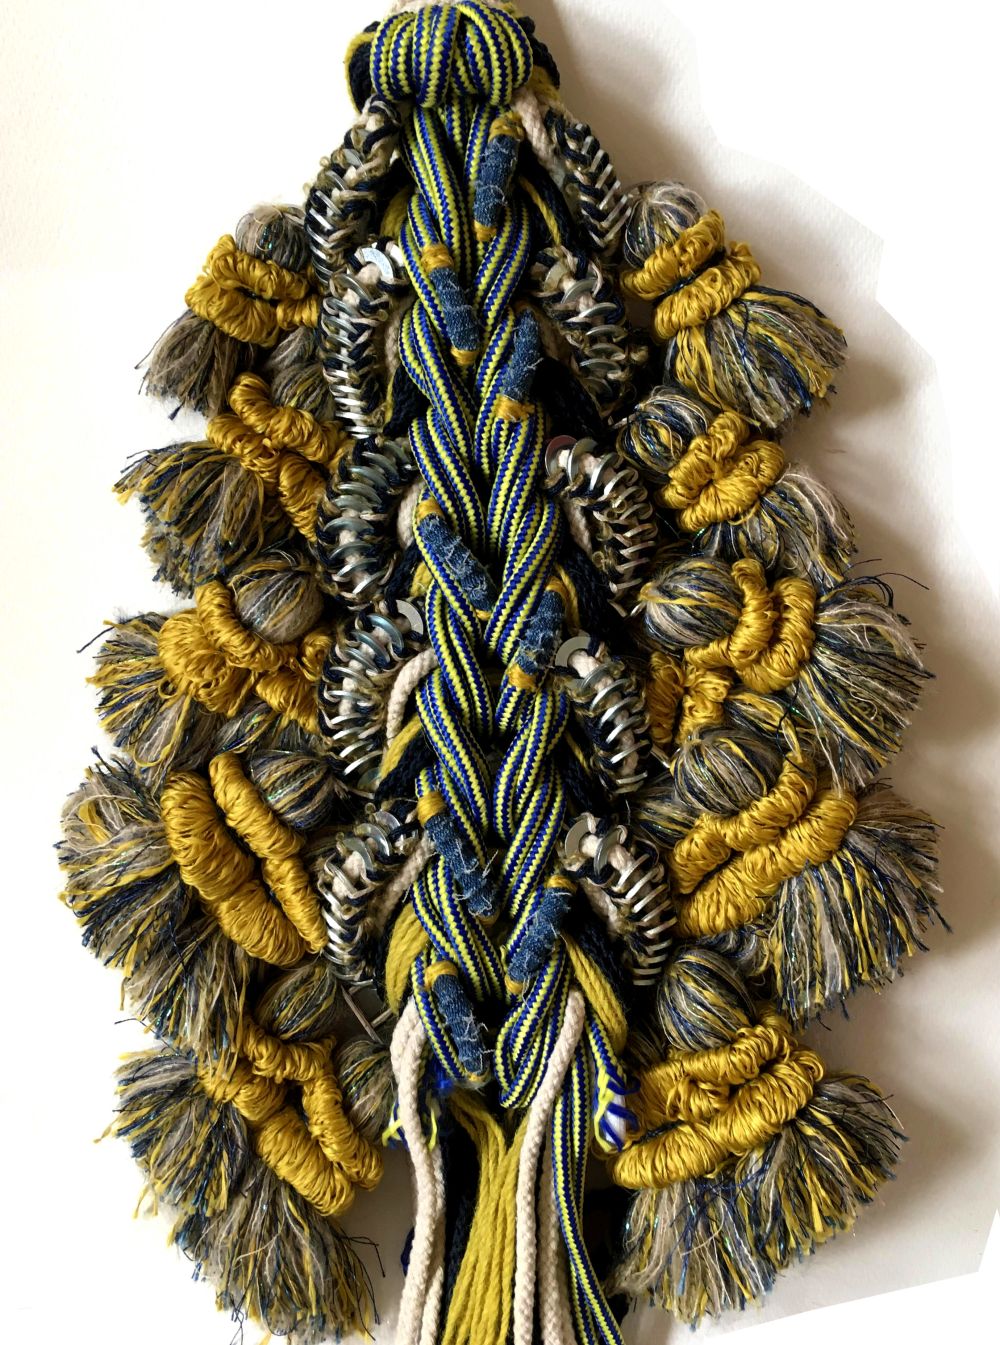 A row of tassels and fringing in gold, yellow, blue and green materials